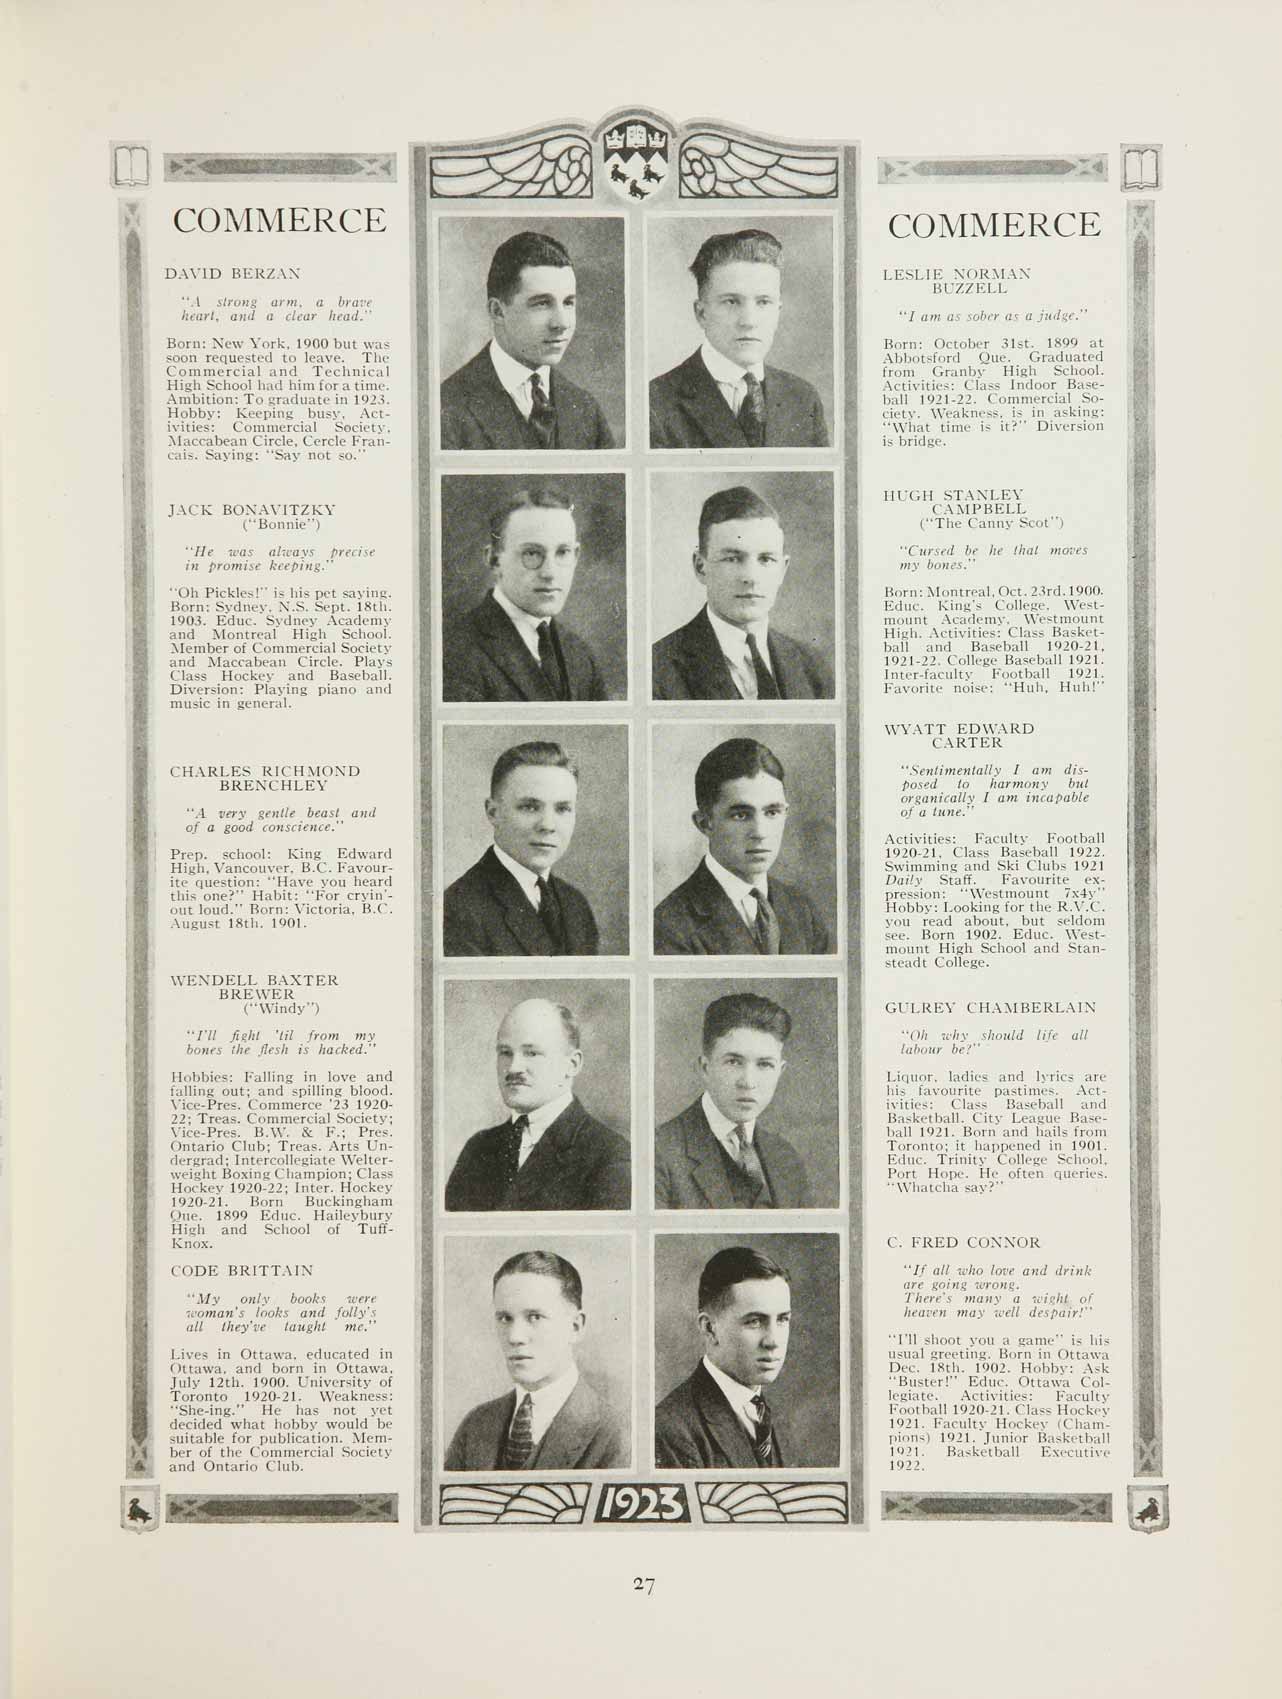 McGill Yearbook: 1923